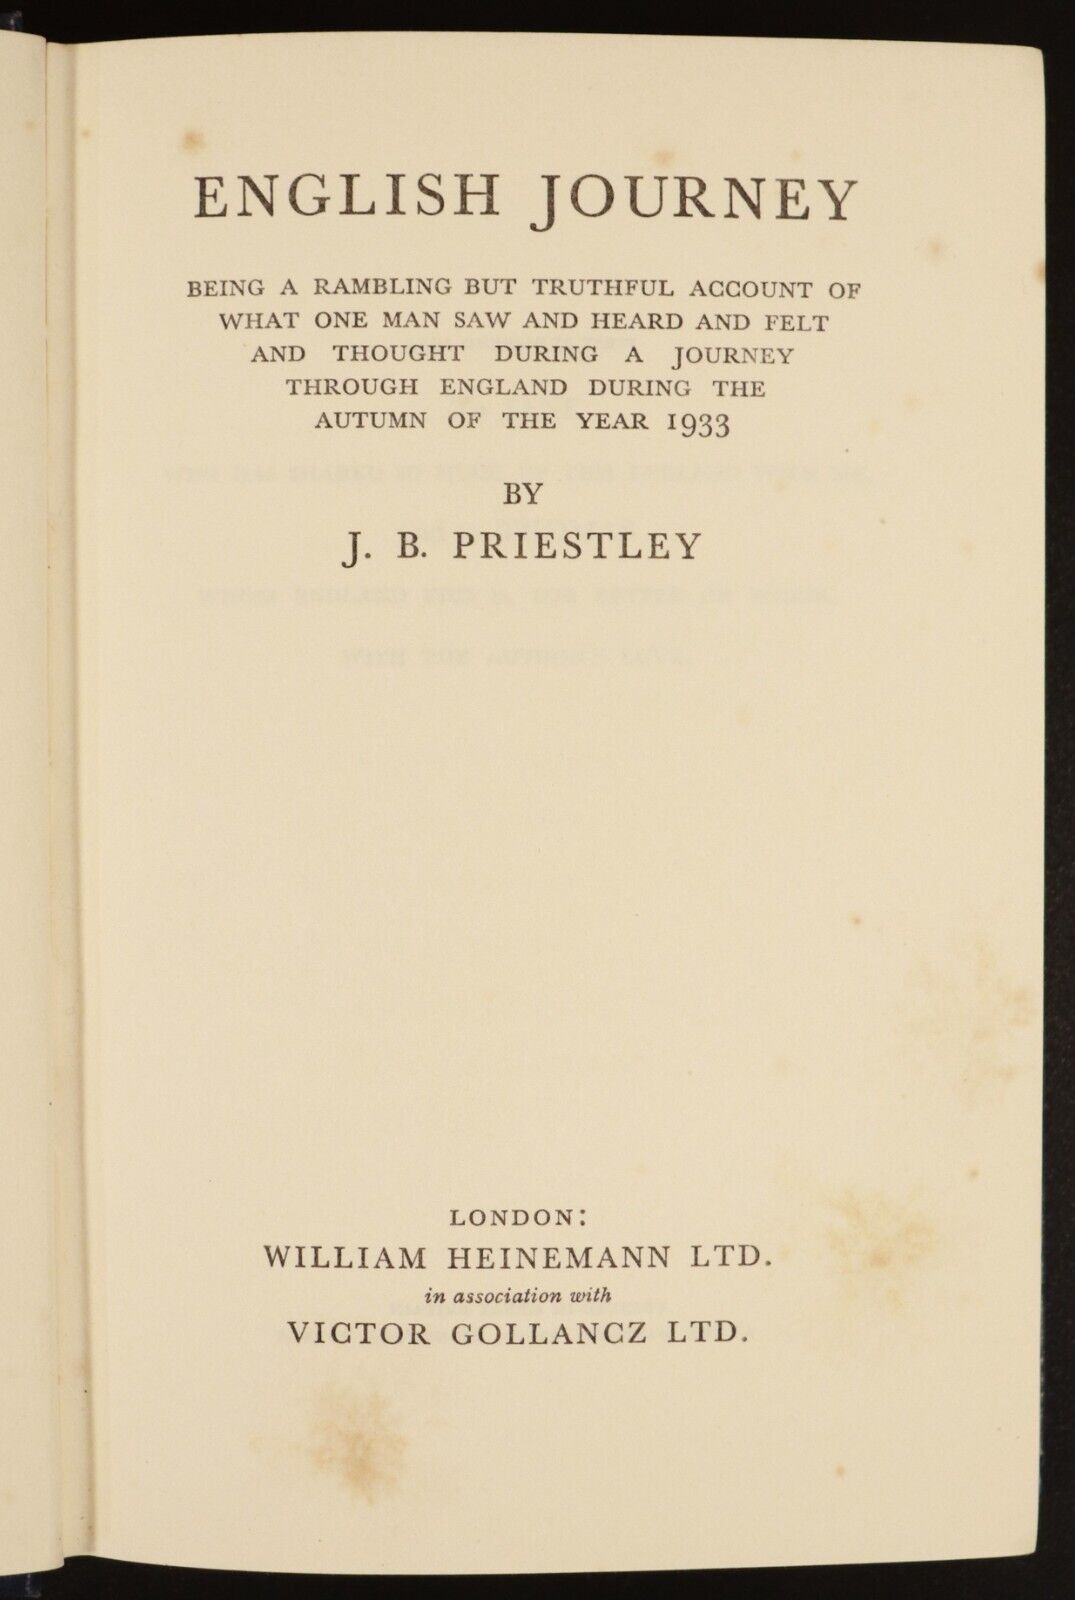 1934 English Journey by JB Priestley 1st Edition Travel Book England - 0